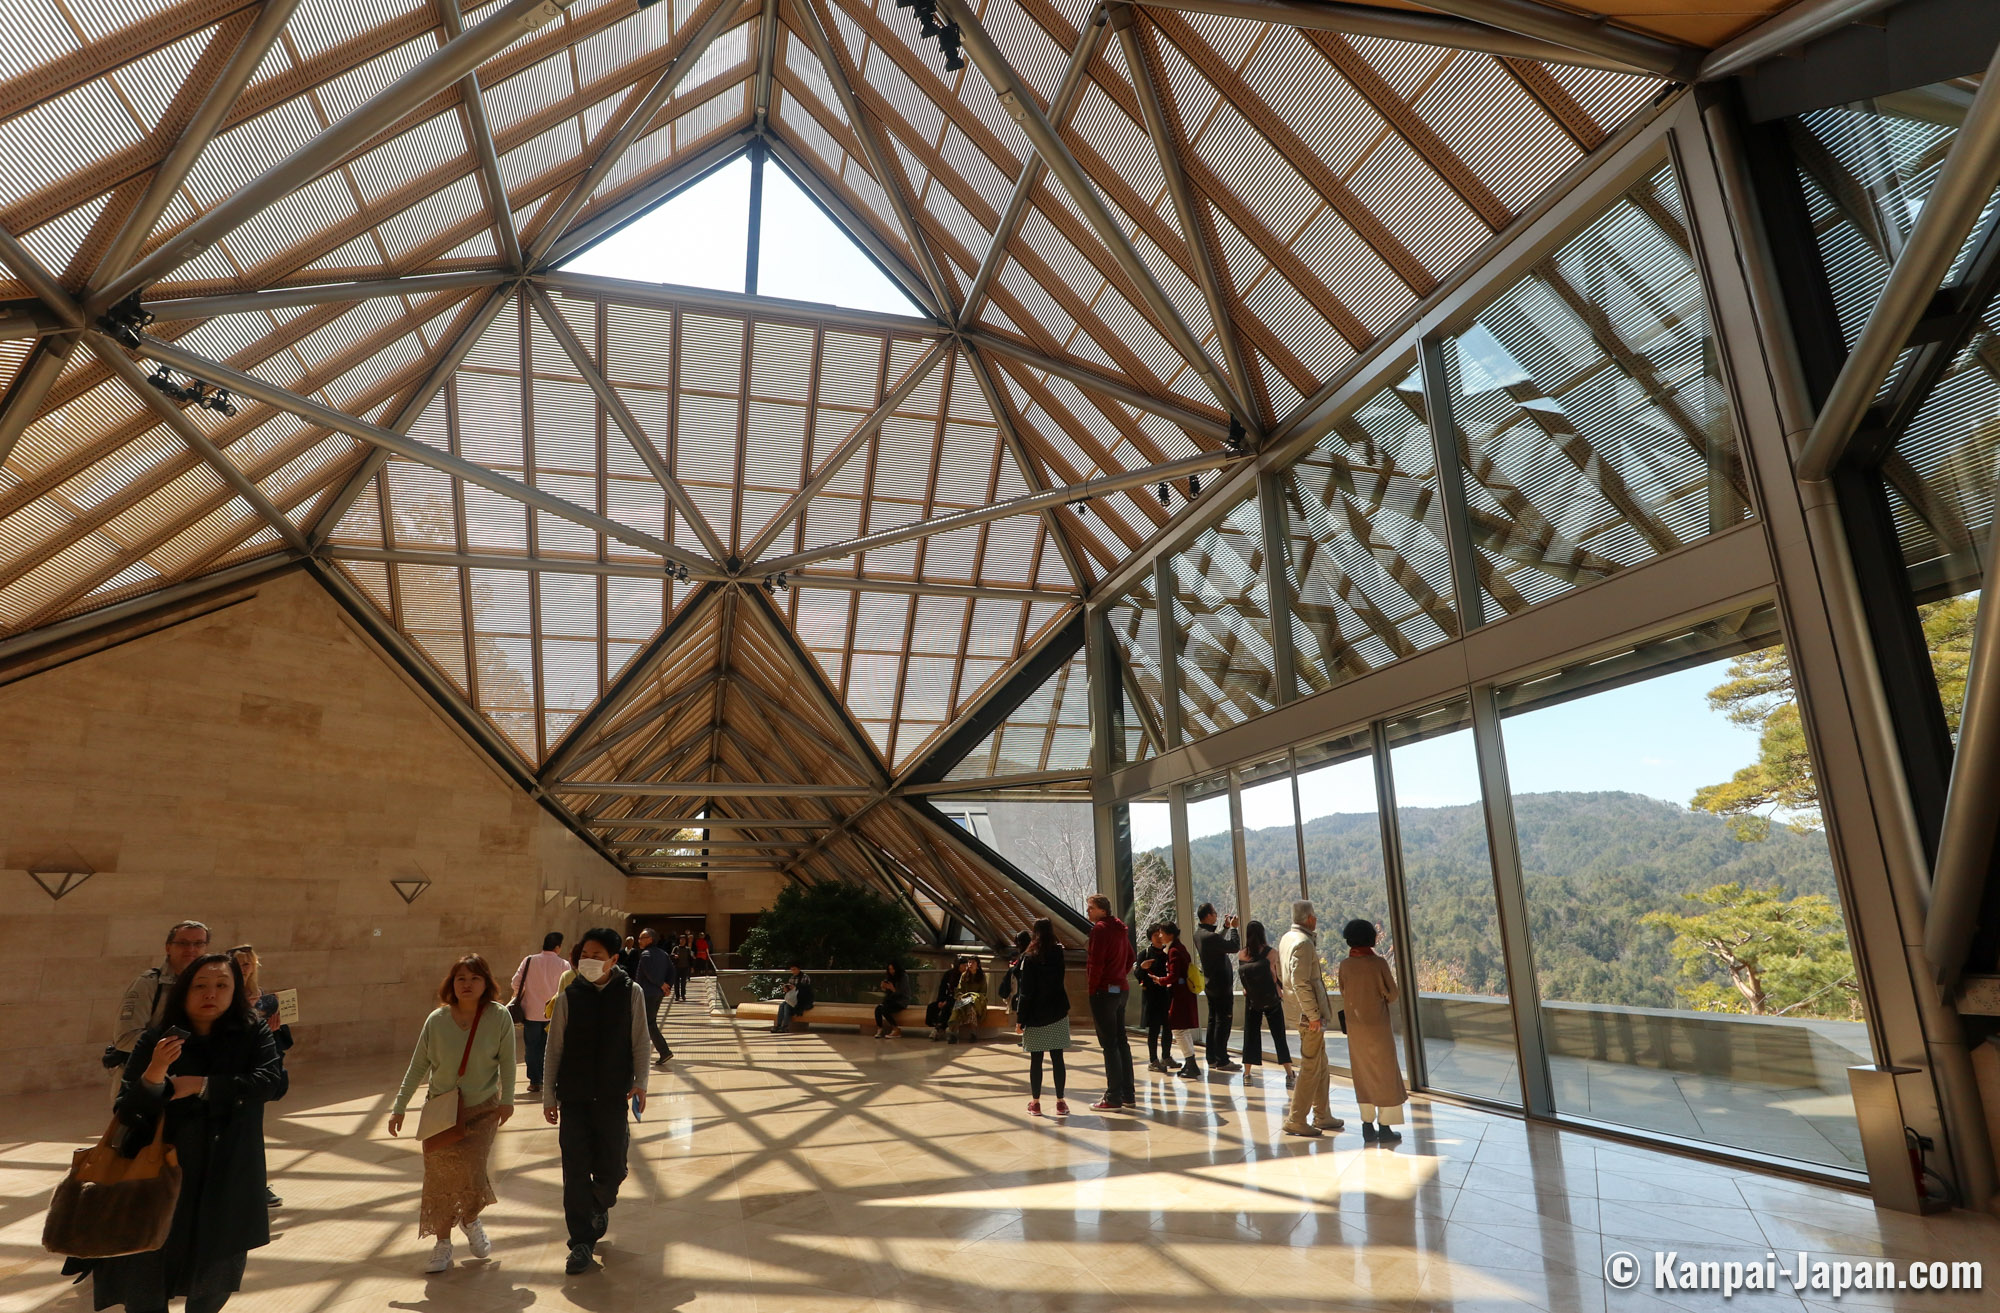 Lobby of Miho Museum Figure.5. Hall entrance (photo source: network)